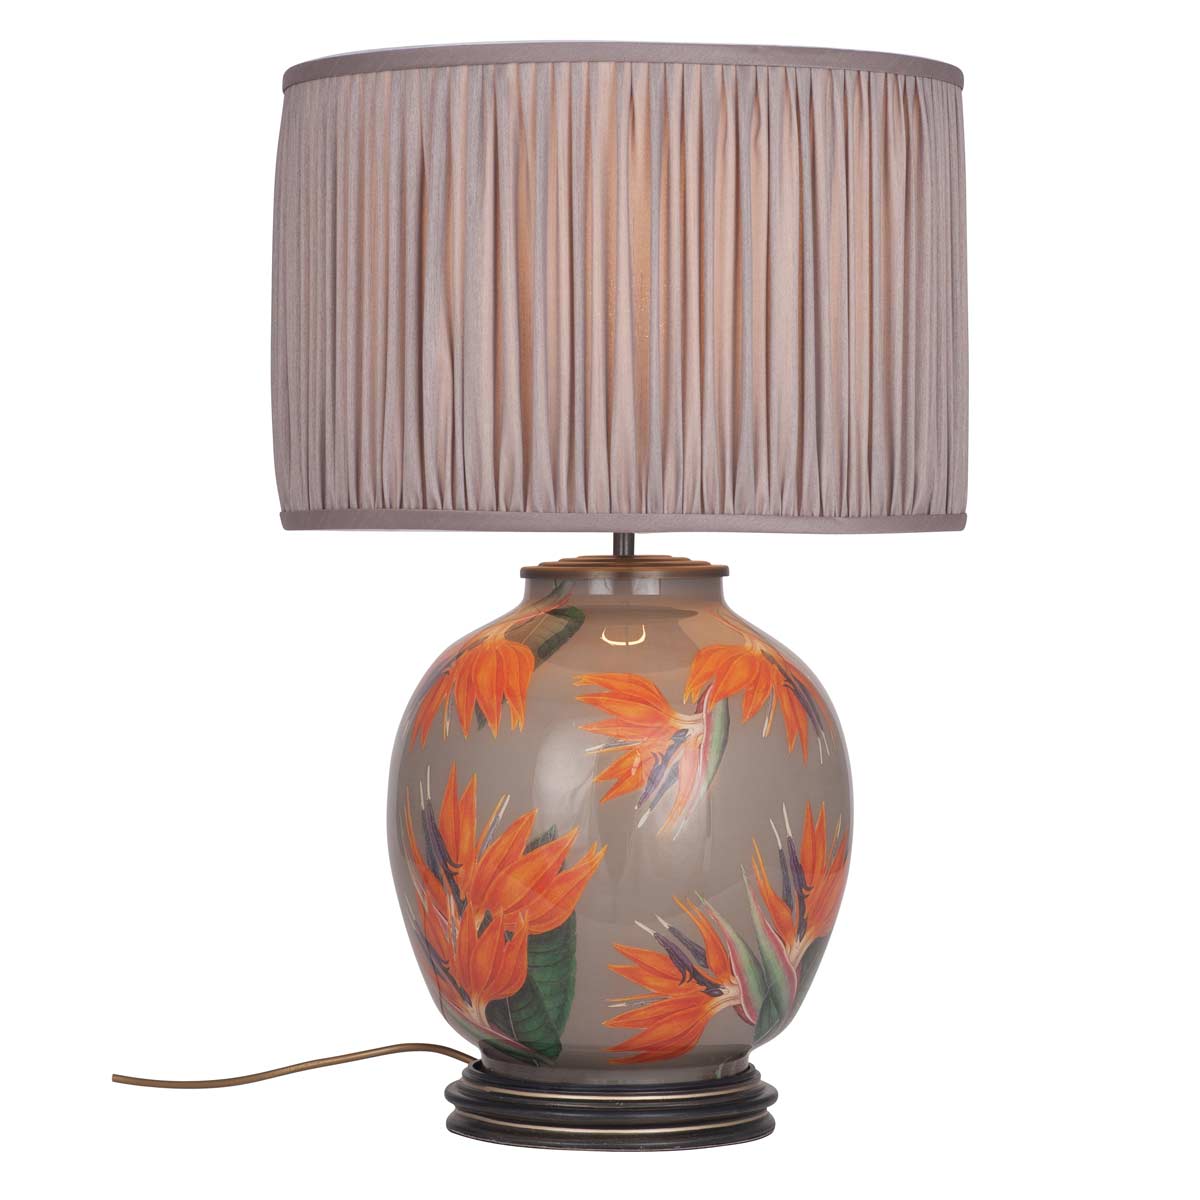 Unique table lamp sold by South Charlotte Fine Lighting